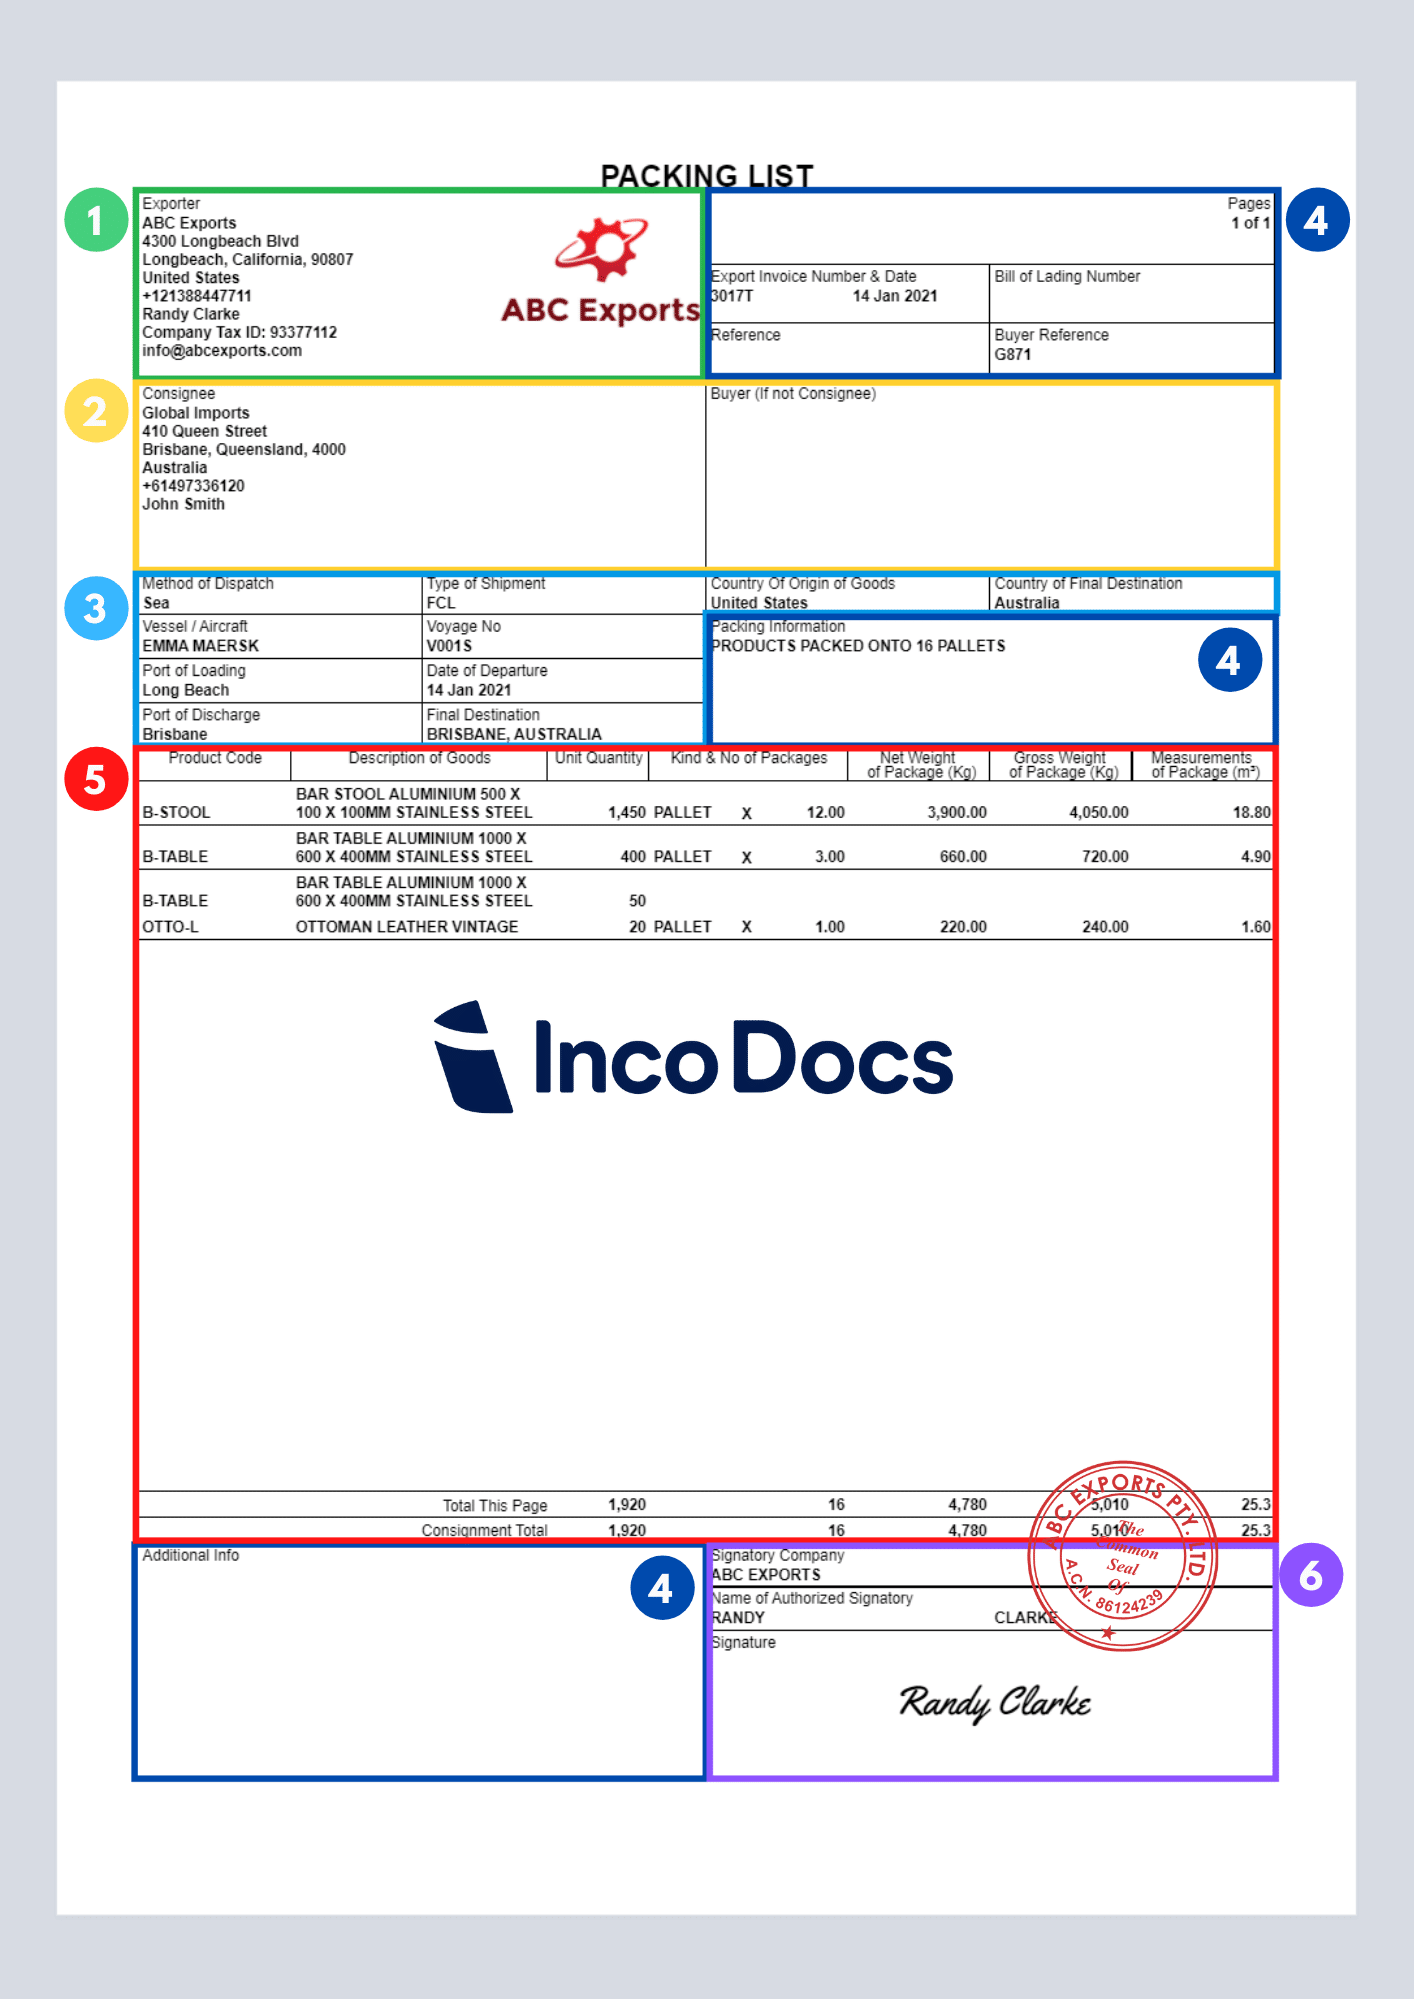 komfort Mus Moden How to Create and Download a Packing List for Export Shipments | IncoDocs